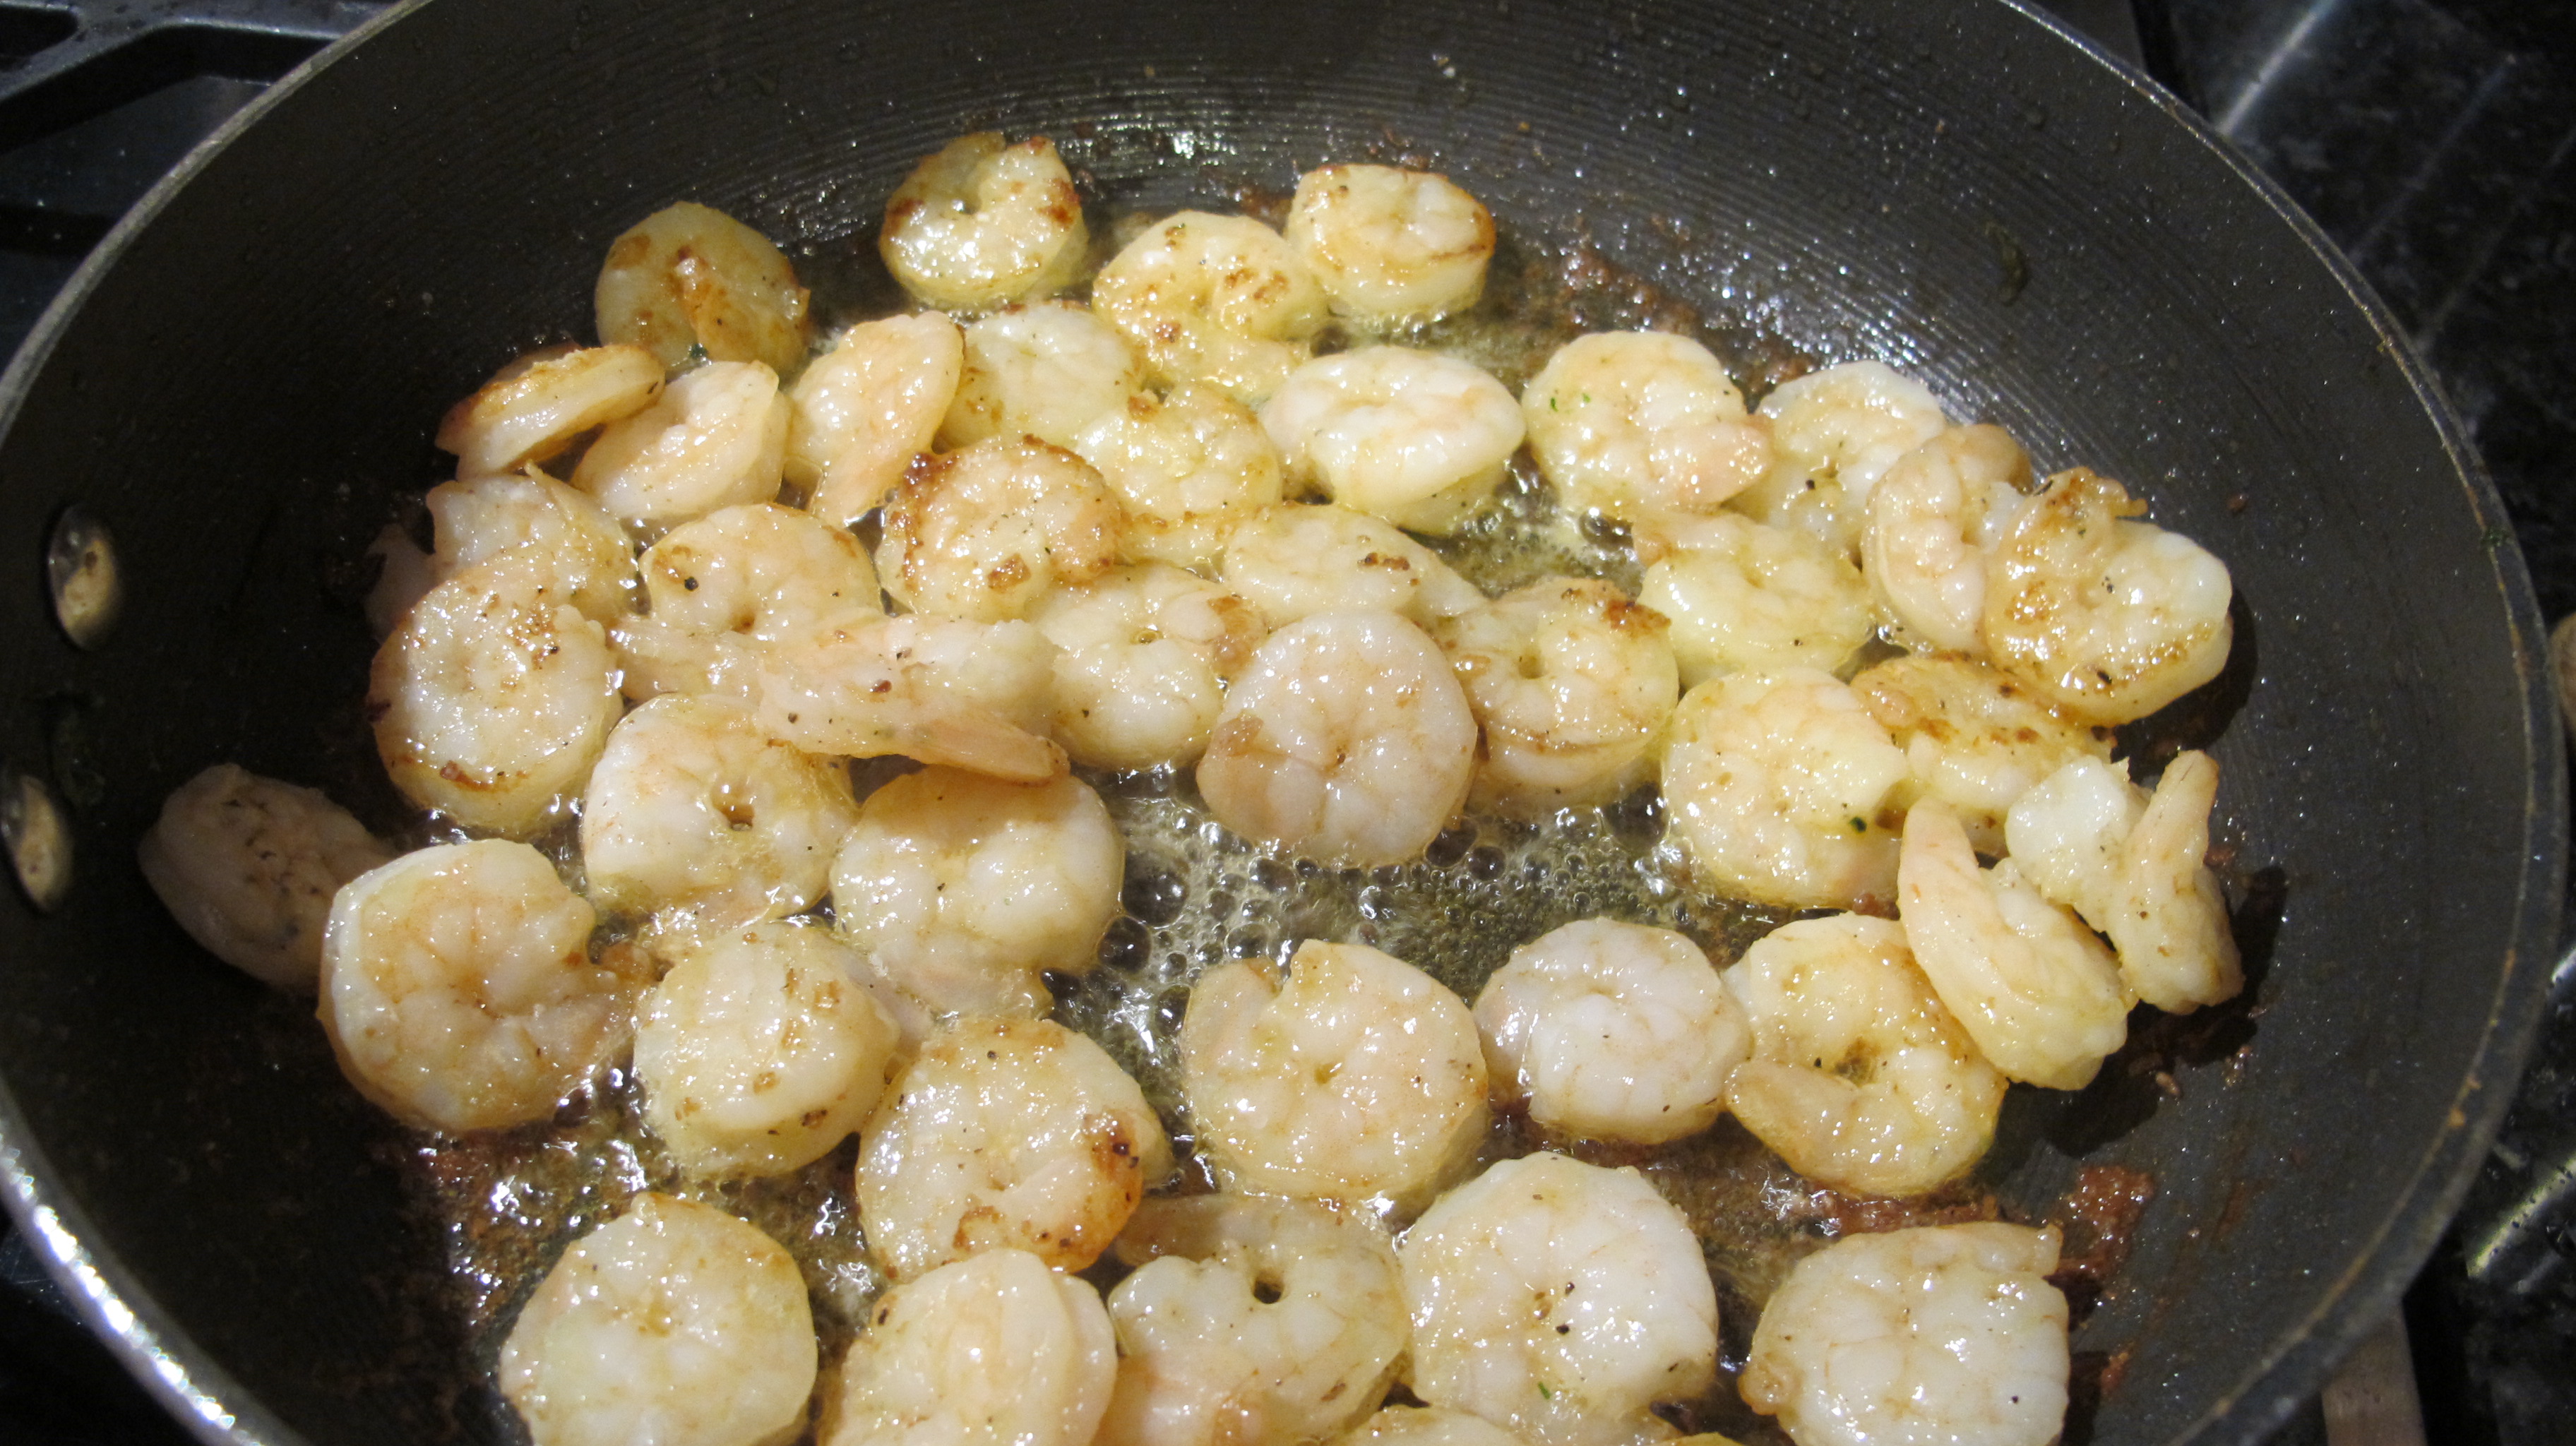 The golden, cooked shrimp. 